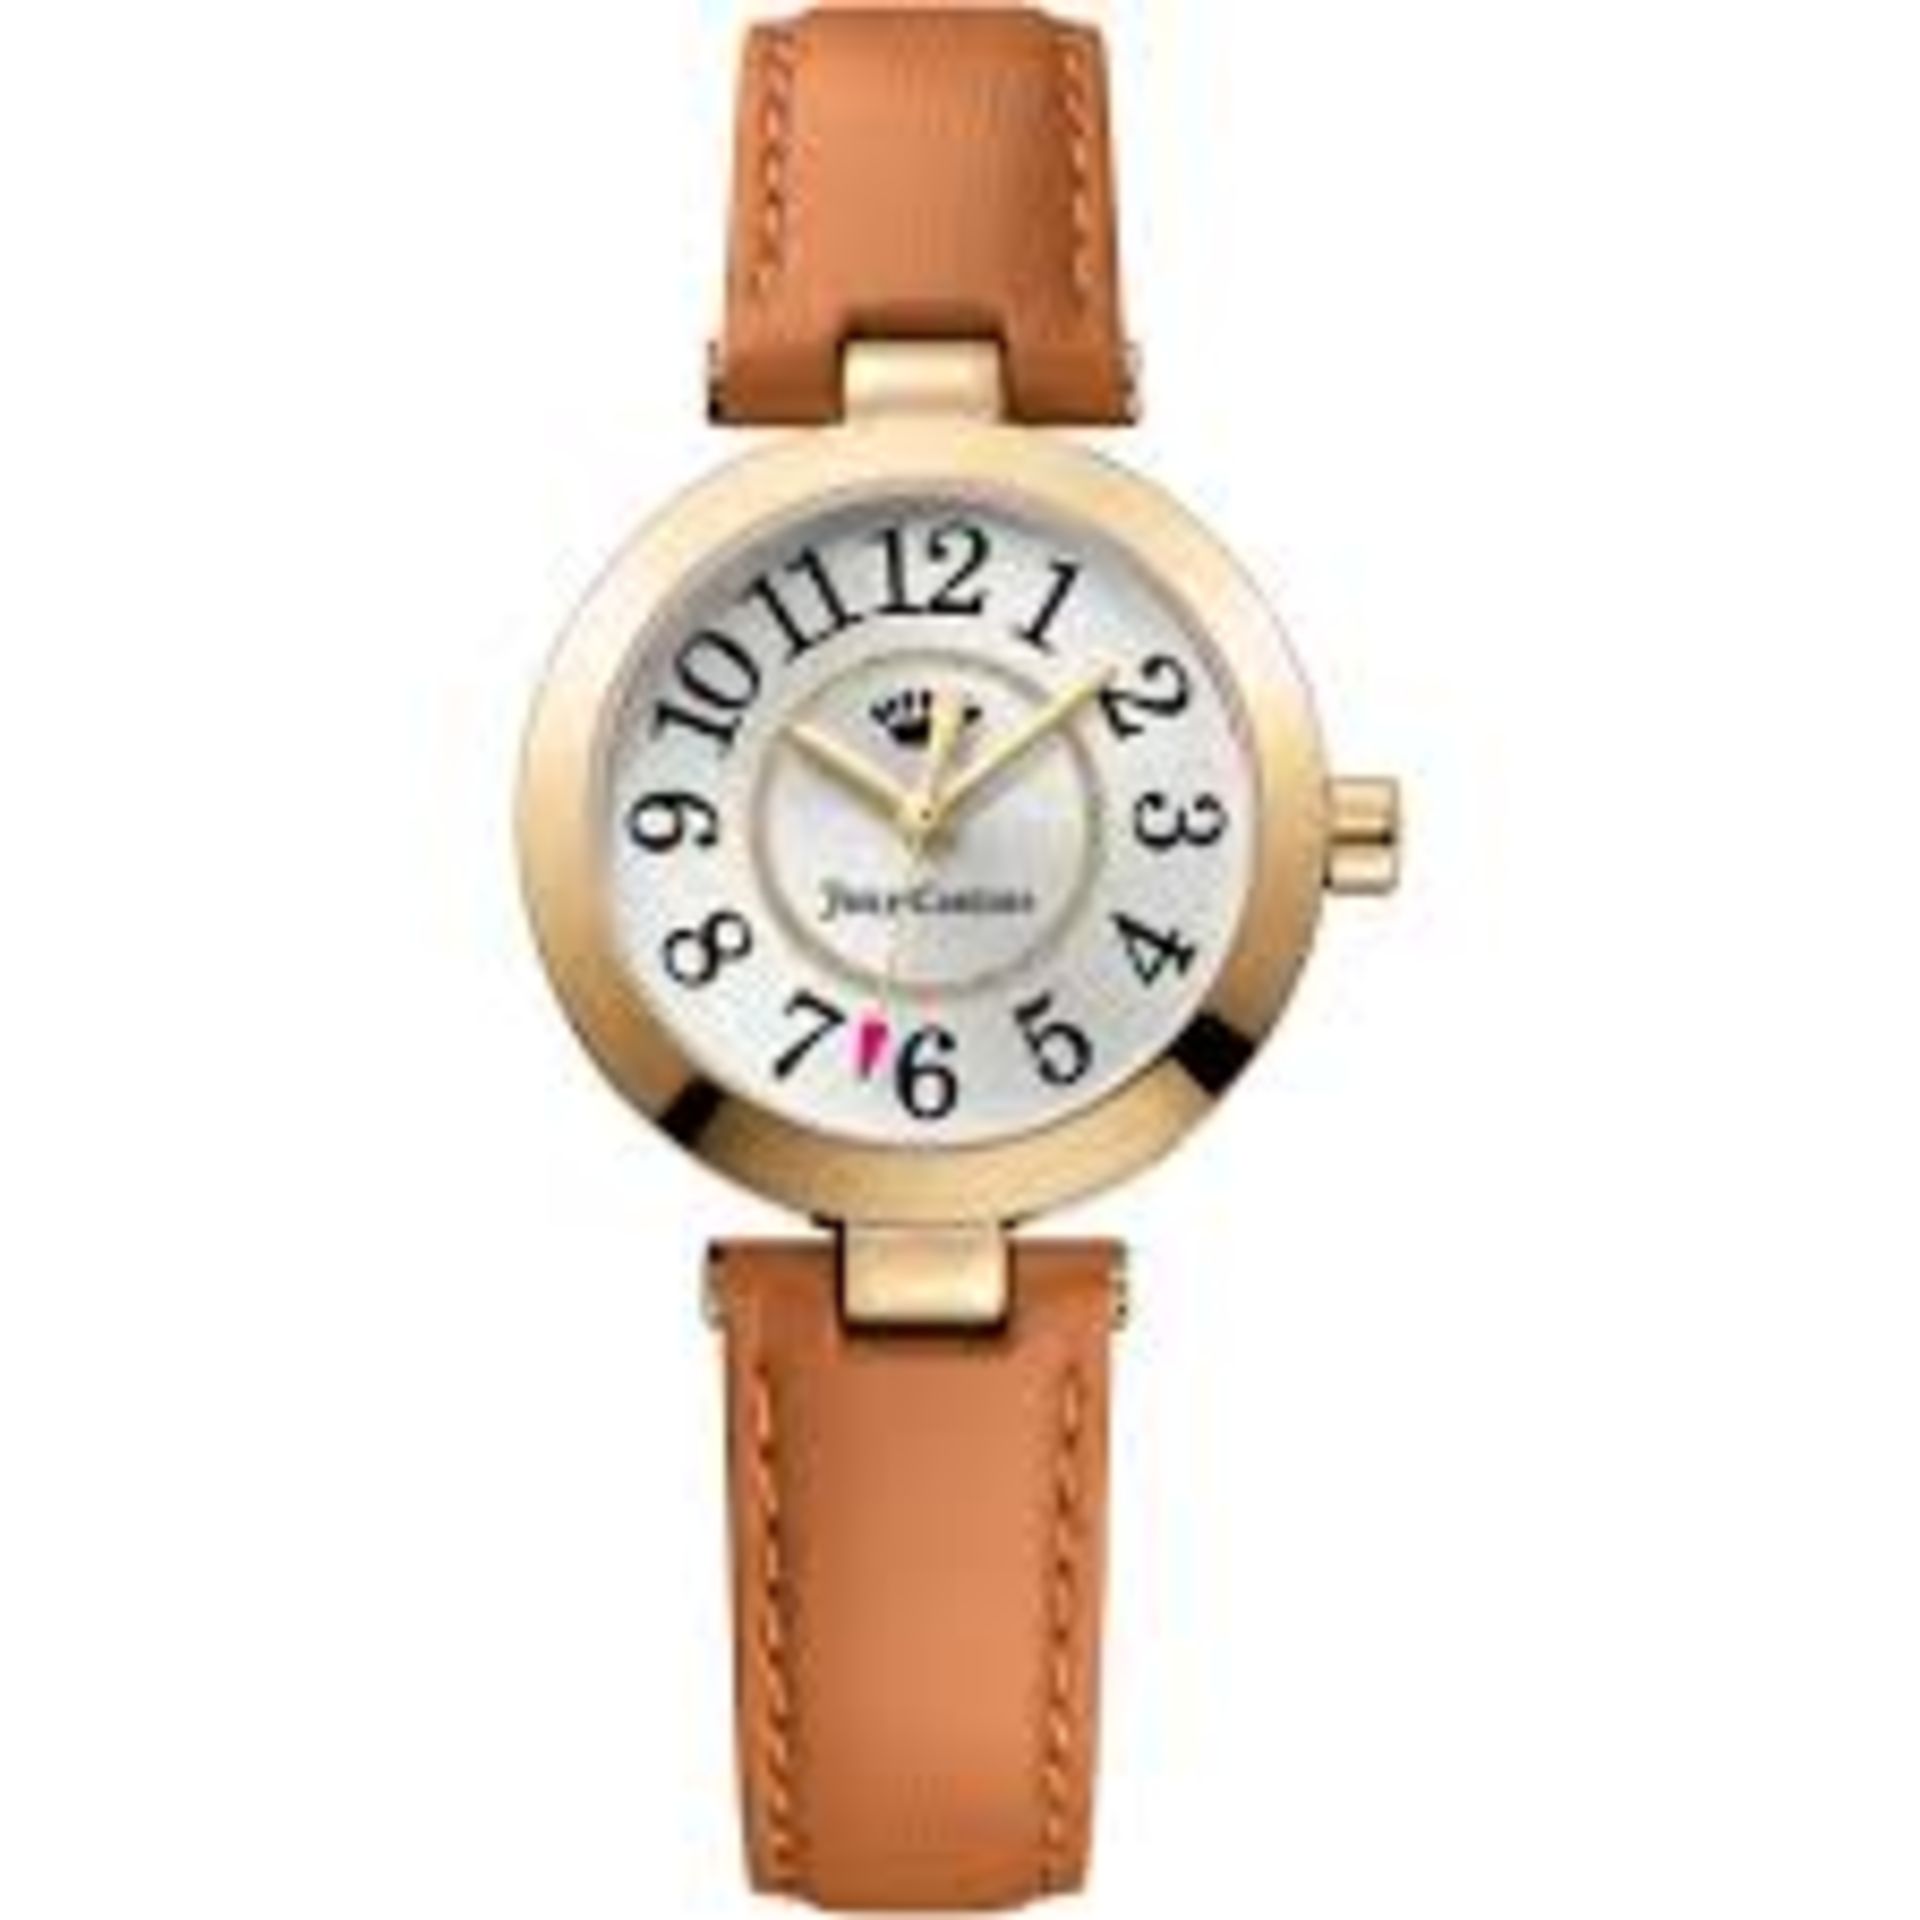 BRAND NEW JUICY COUTURE LADIES WRIST WATCH WITH 2 YEARS INTERNATIONAL WARRANTY (1901462)